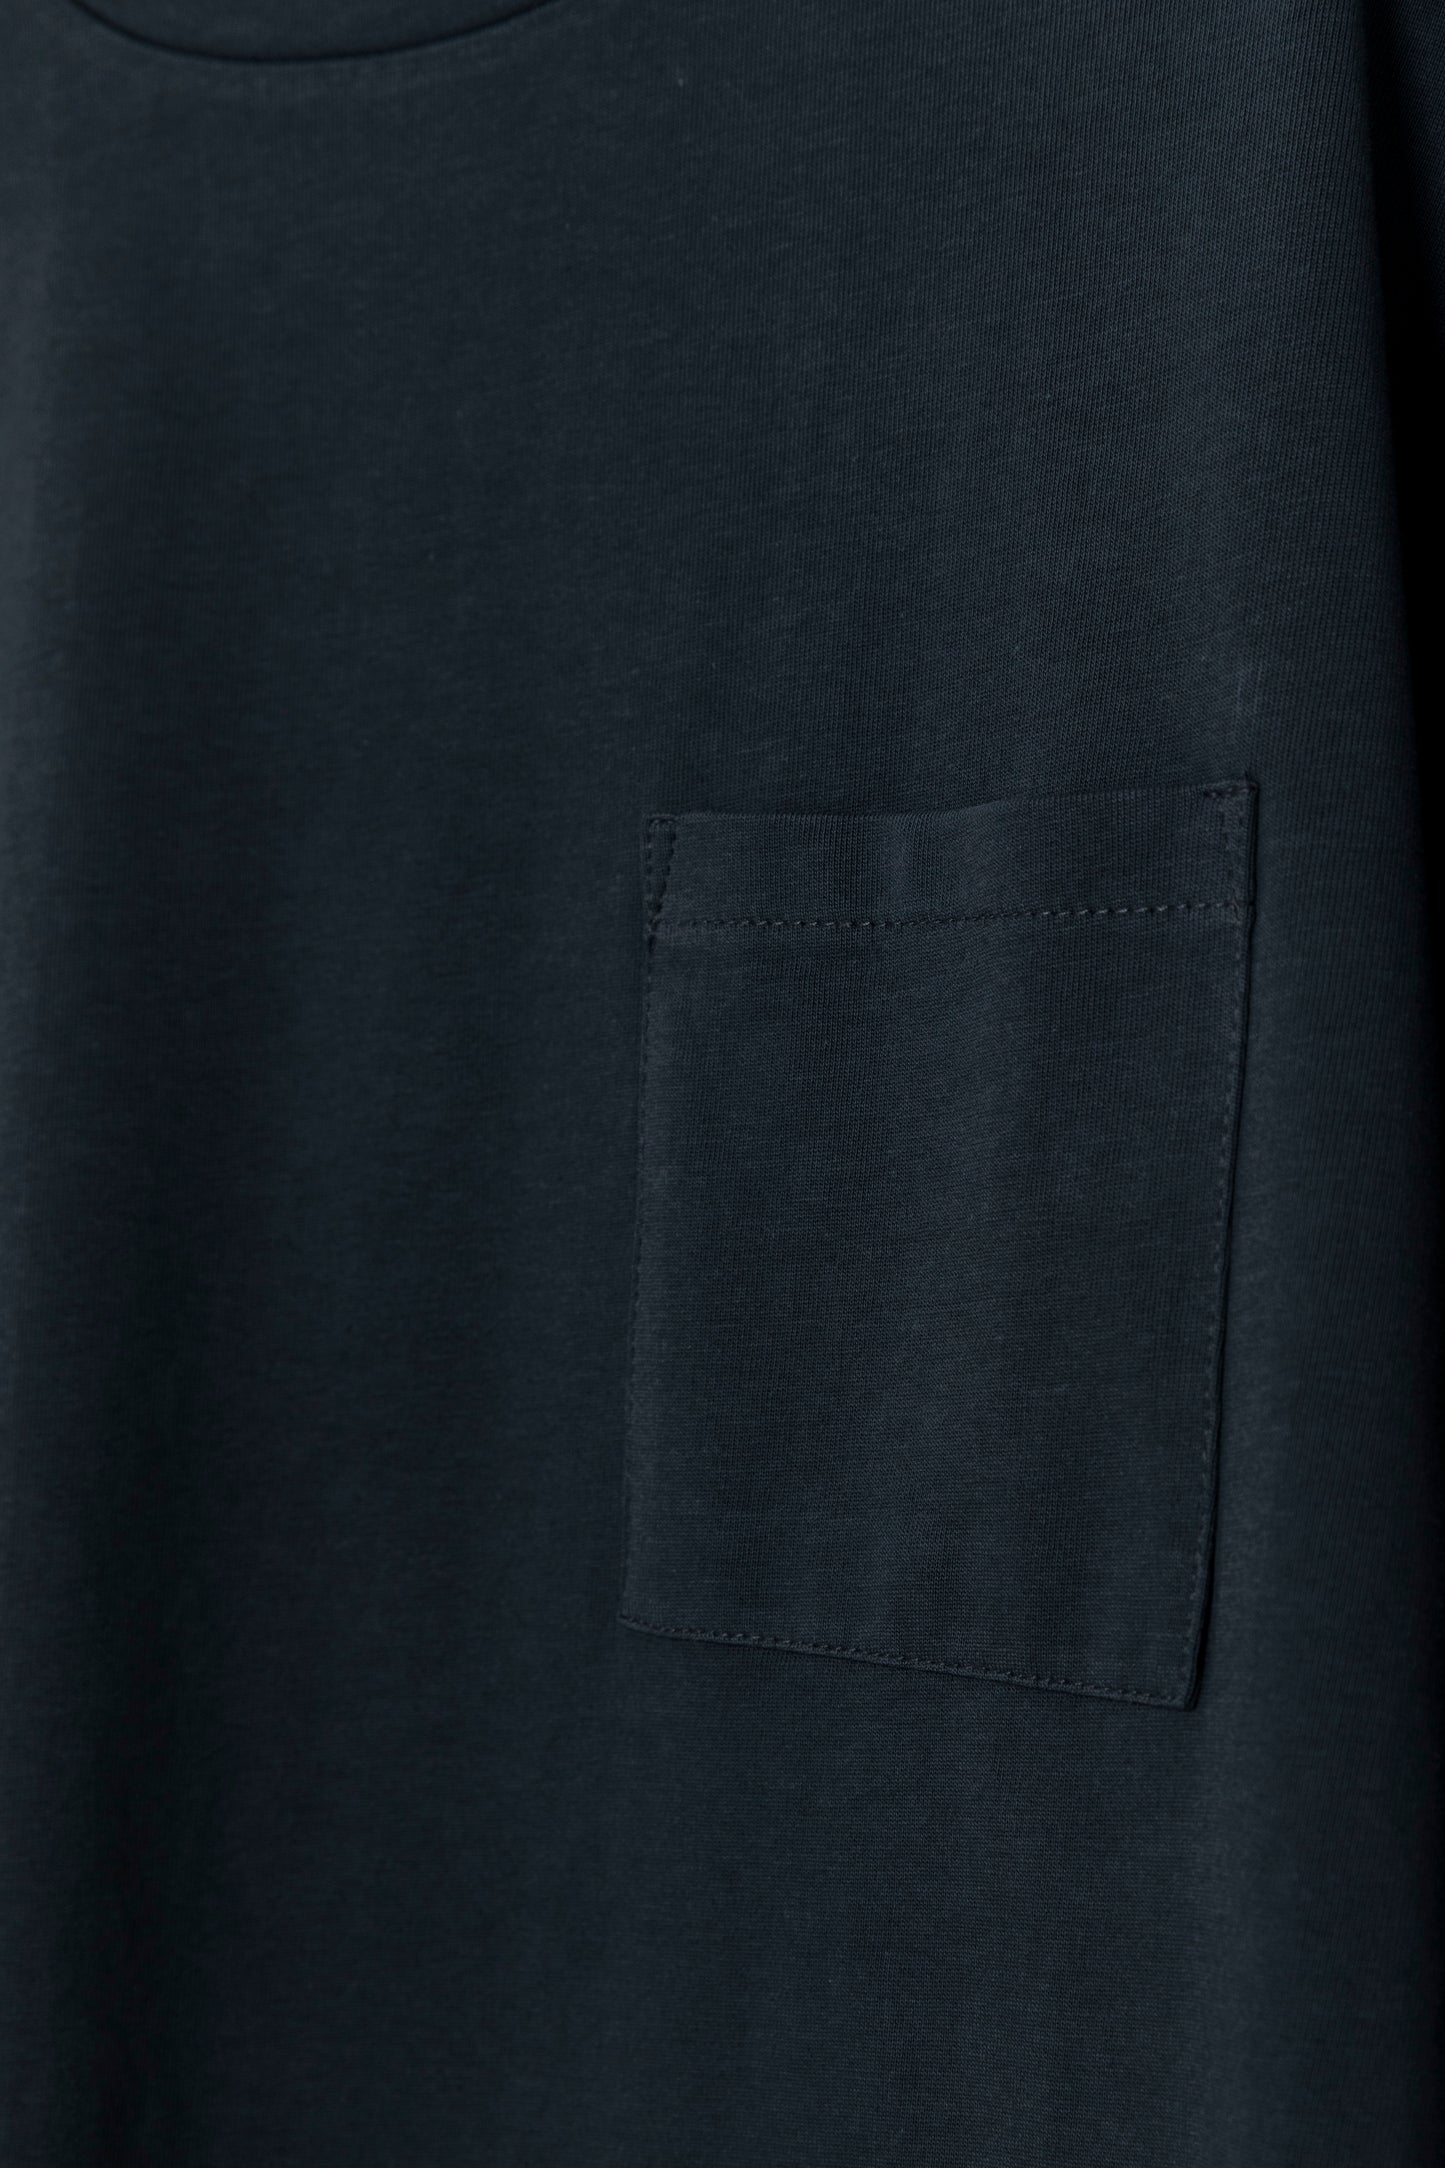 By R AW20 L/S Curve Pocket Tee